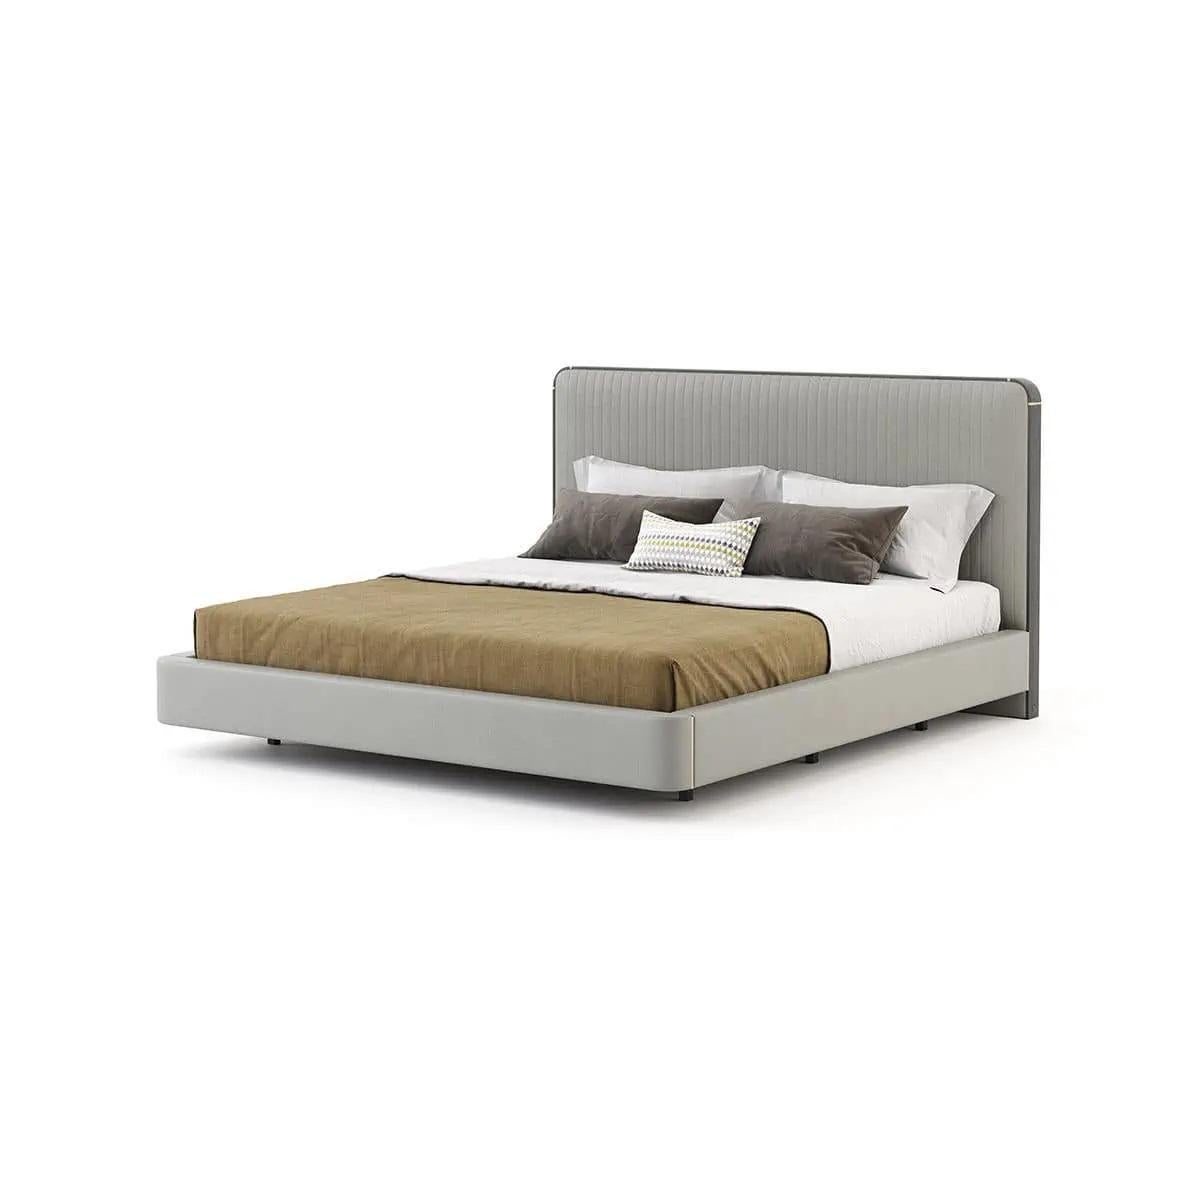 American King Size Bed Offered in Velvet, Wood Veneer and Metal Details For Sale 2